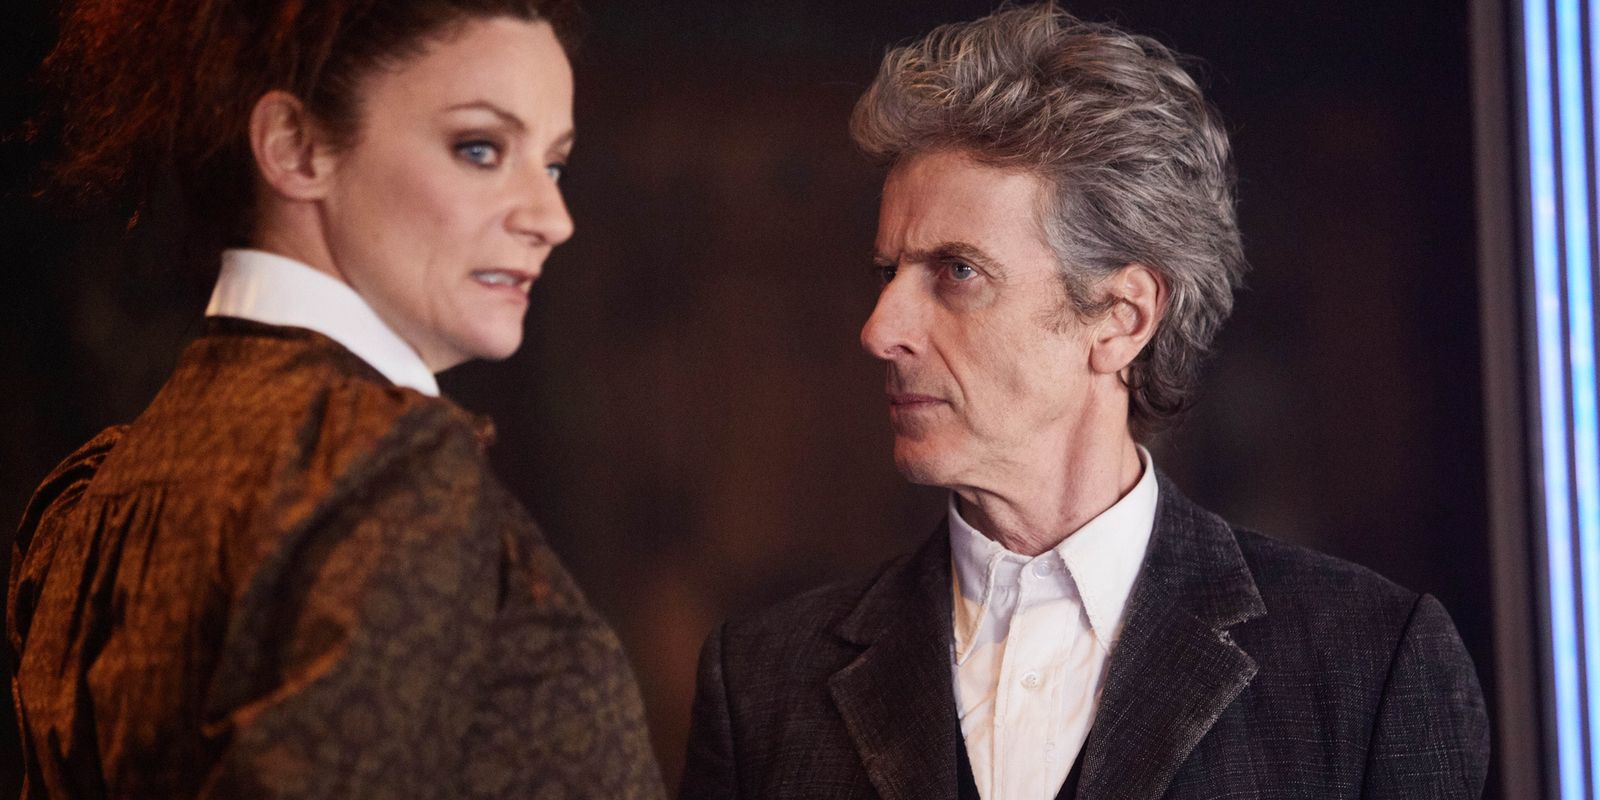 Michell Gomez and Peter Capaldi in Doctor Who Season 10 Episode 8